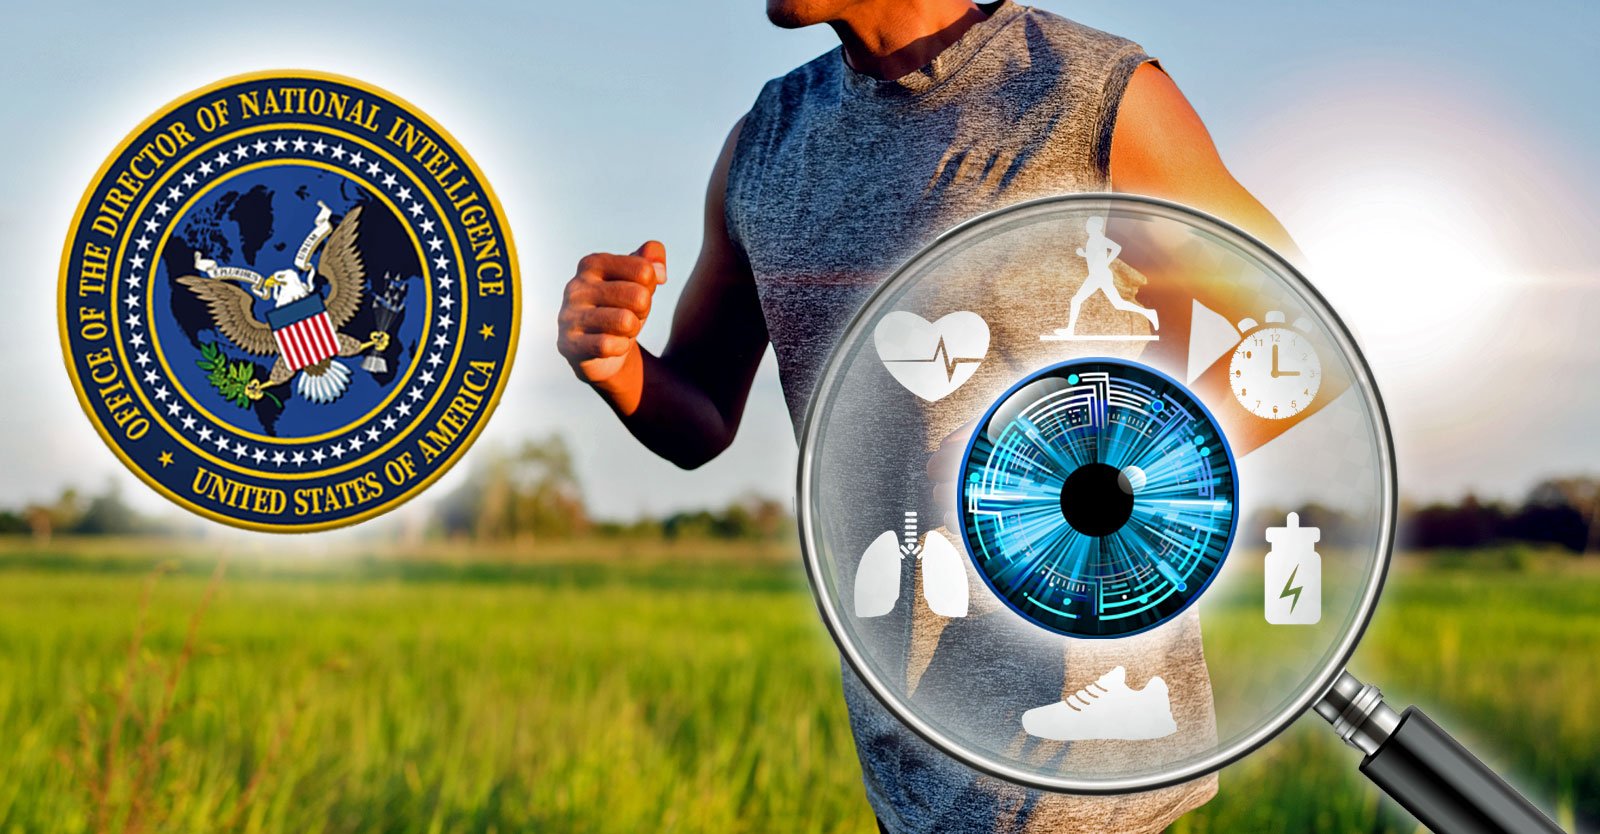 U.S. Spy Agencies To Launch ‘Smart Clothing’ Under Guise Of ‘Better Health Monitoring’